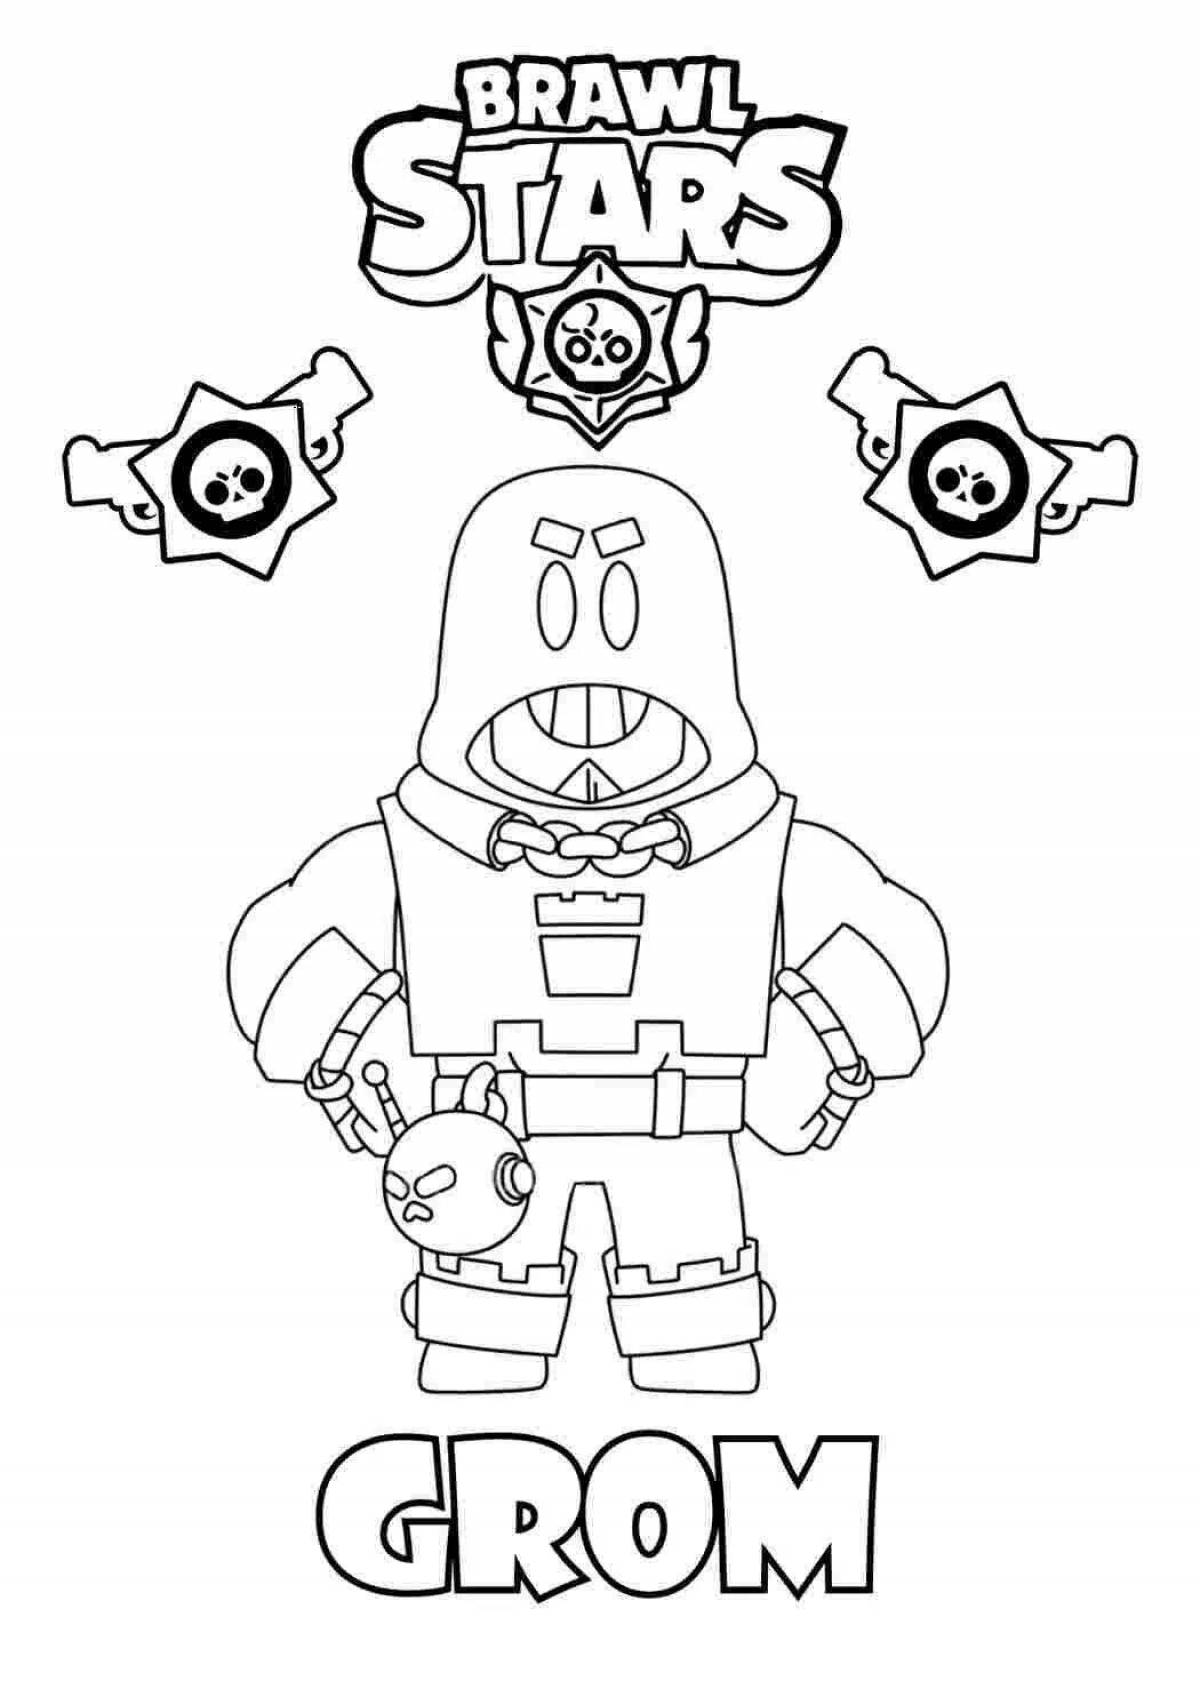 Charming edgar from bravo stars coloring page